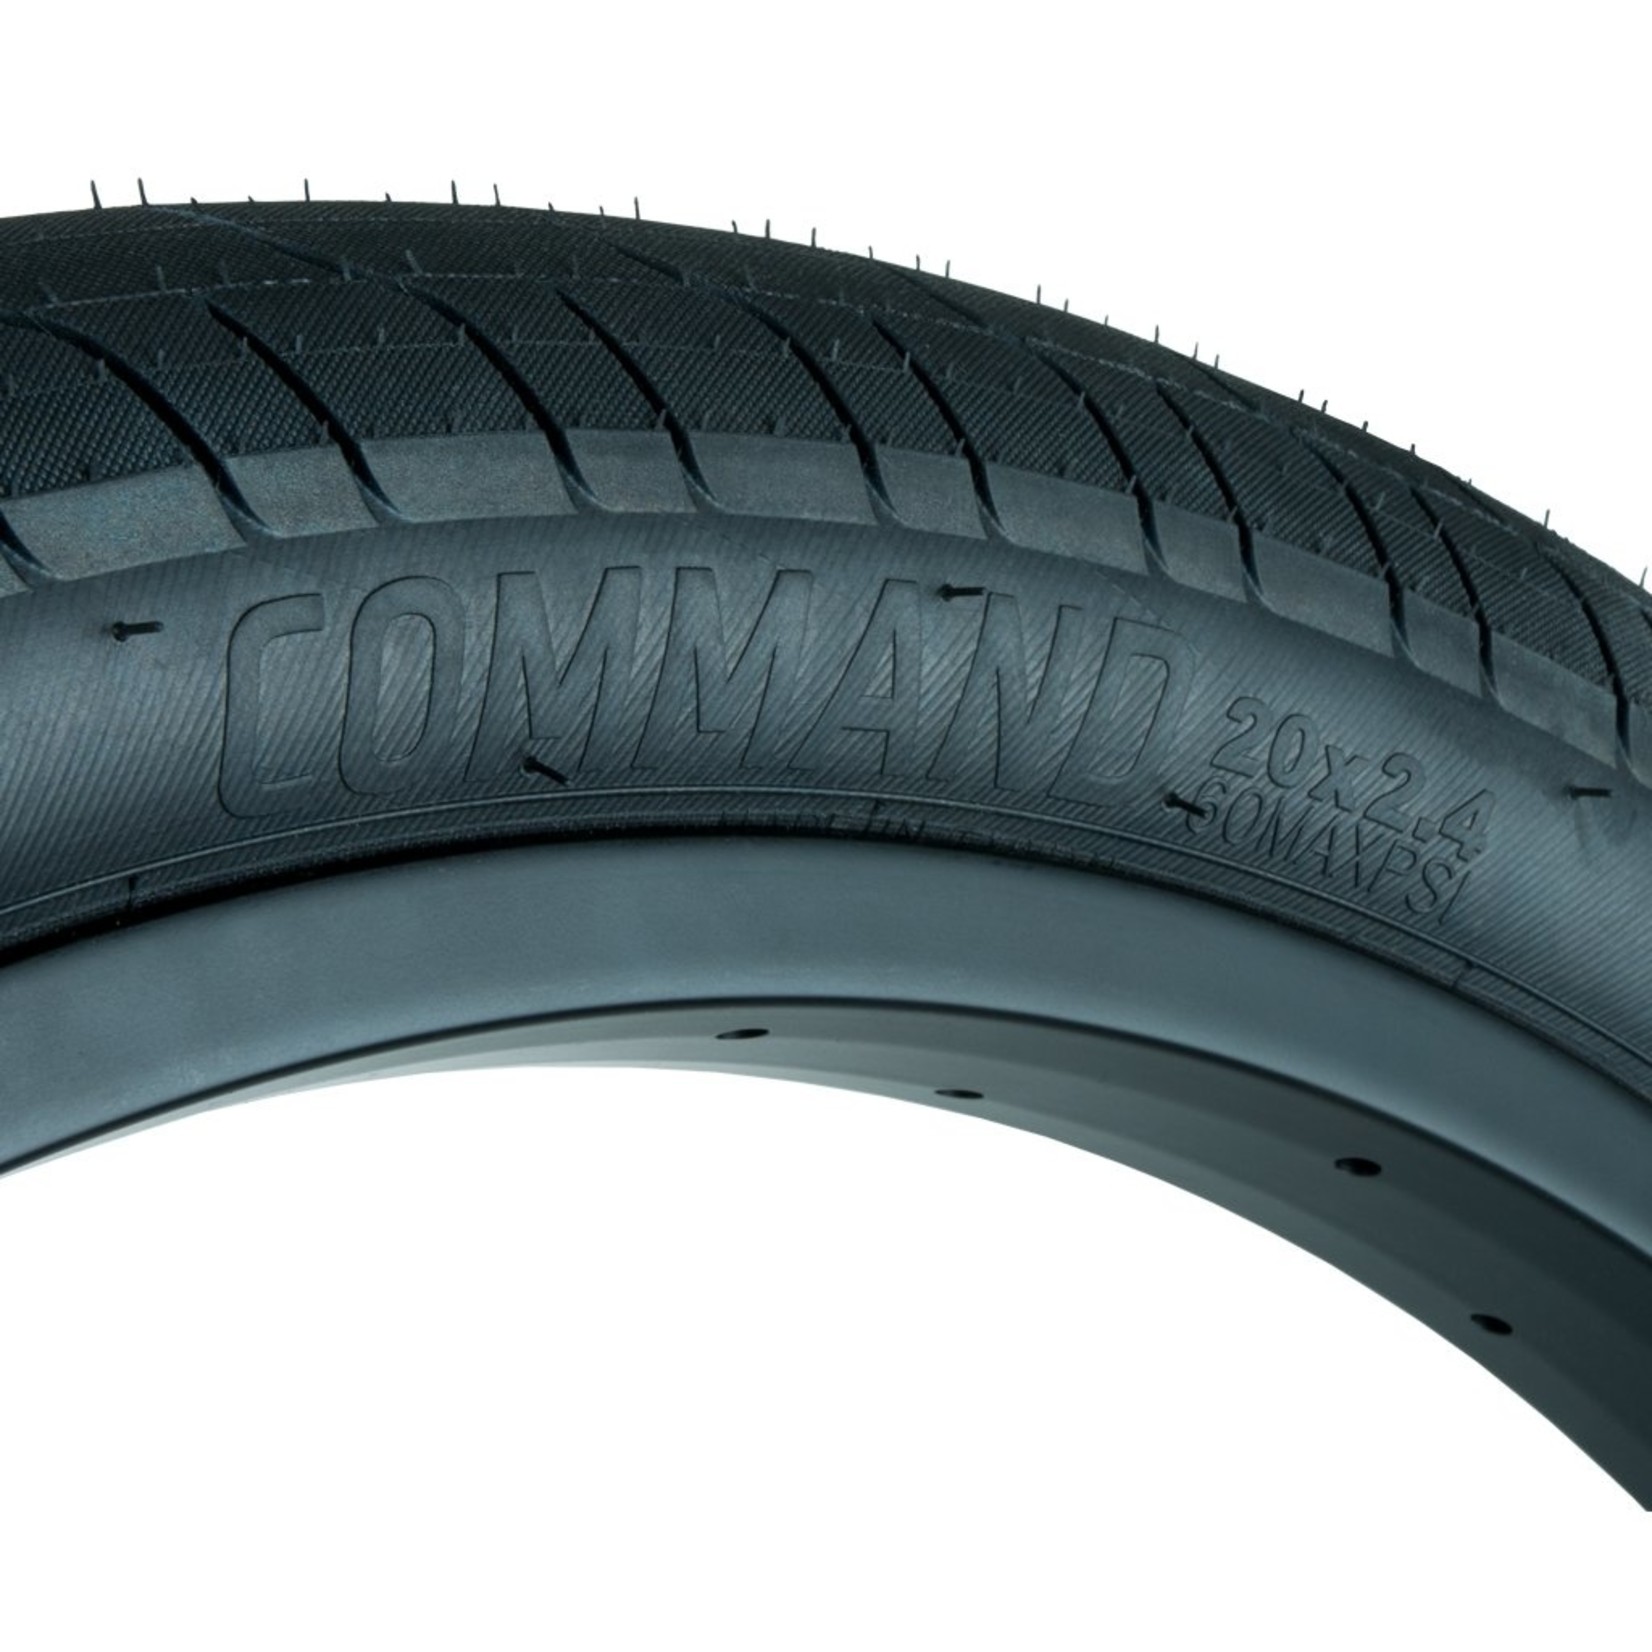 Federal FEDERAL COMMAND LOW PRESSURE TIRE 20X2.4"- BLACK